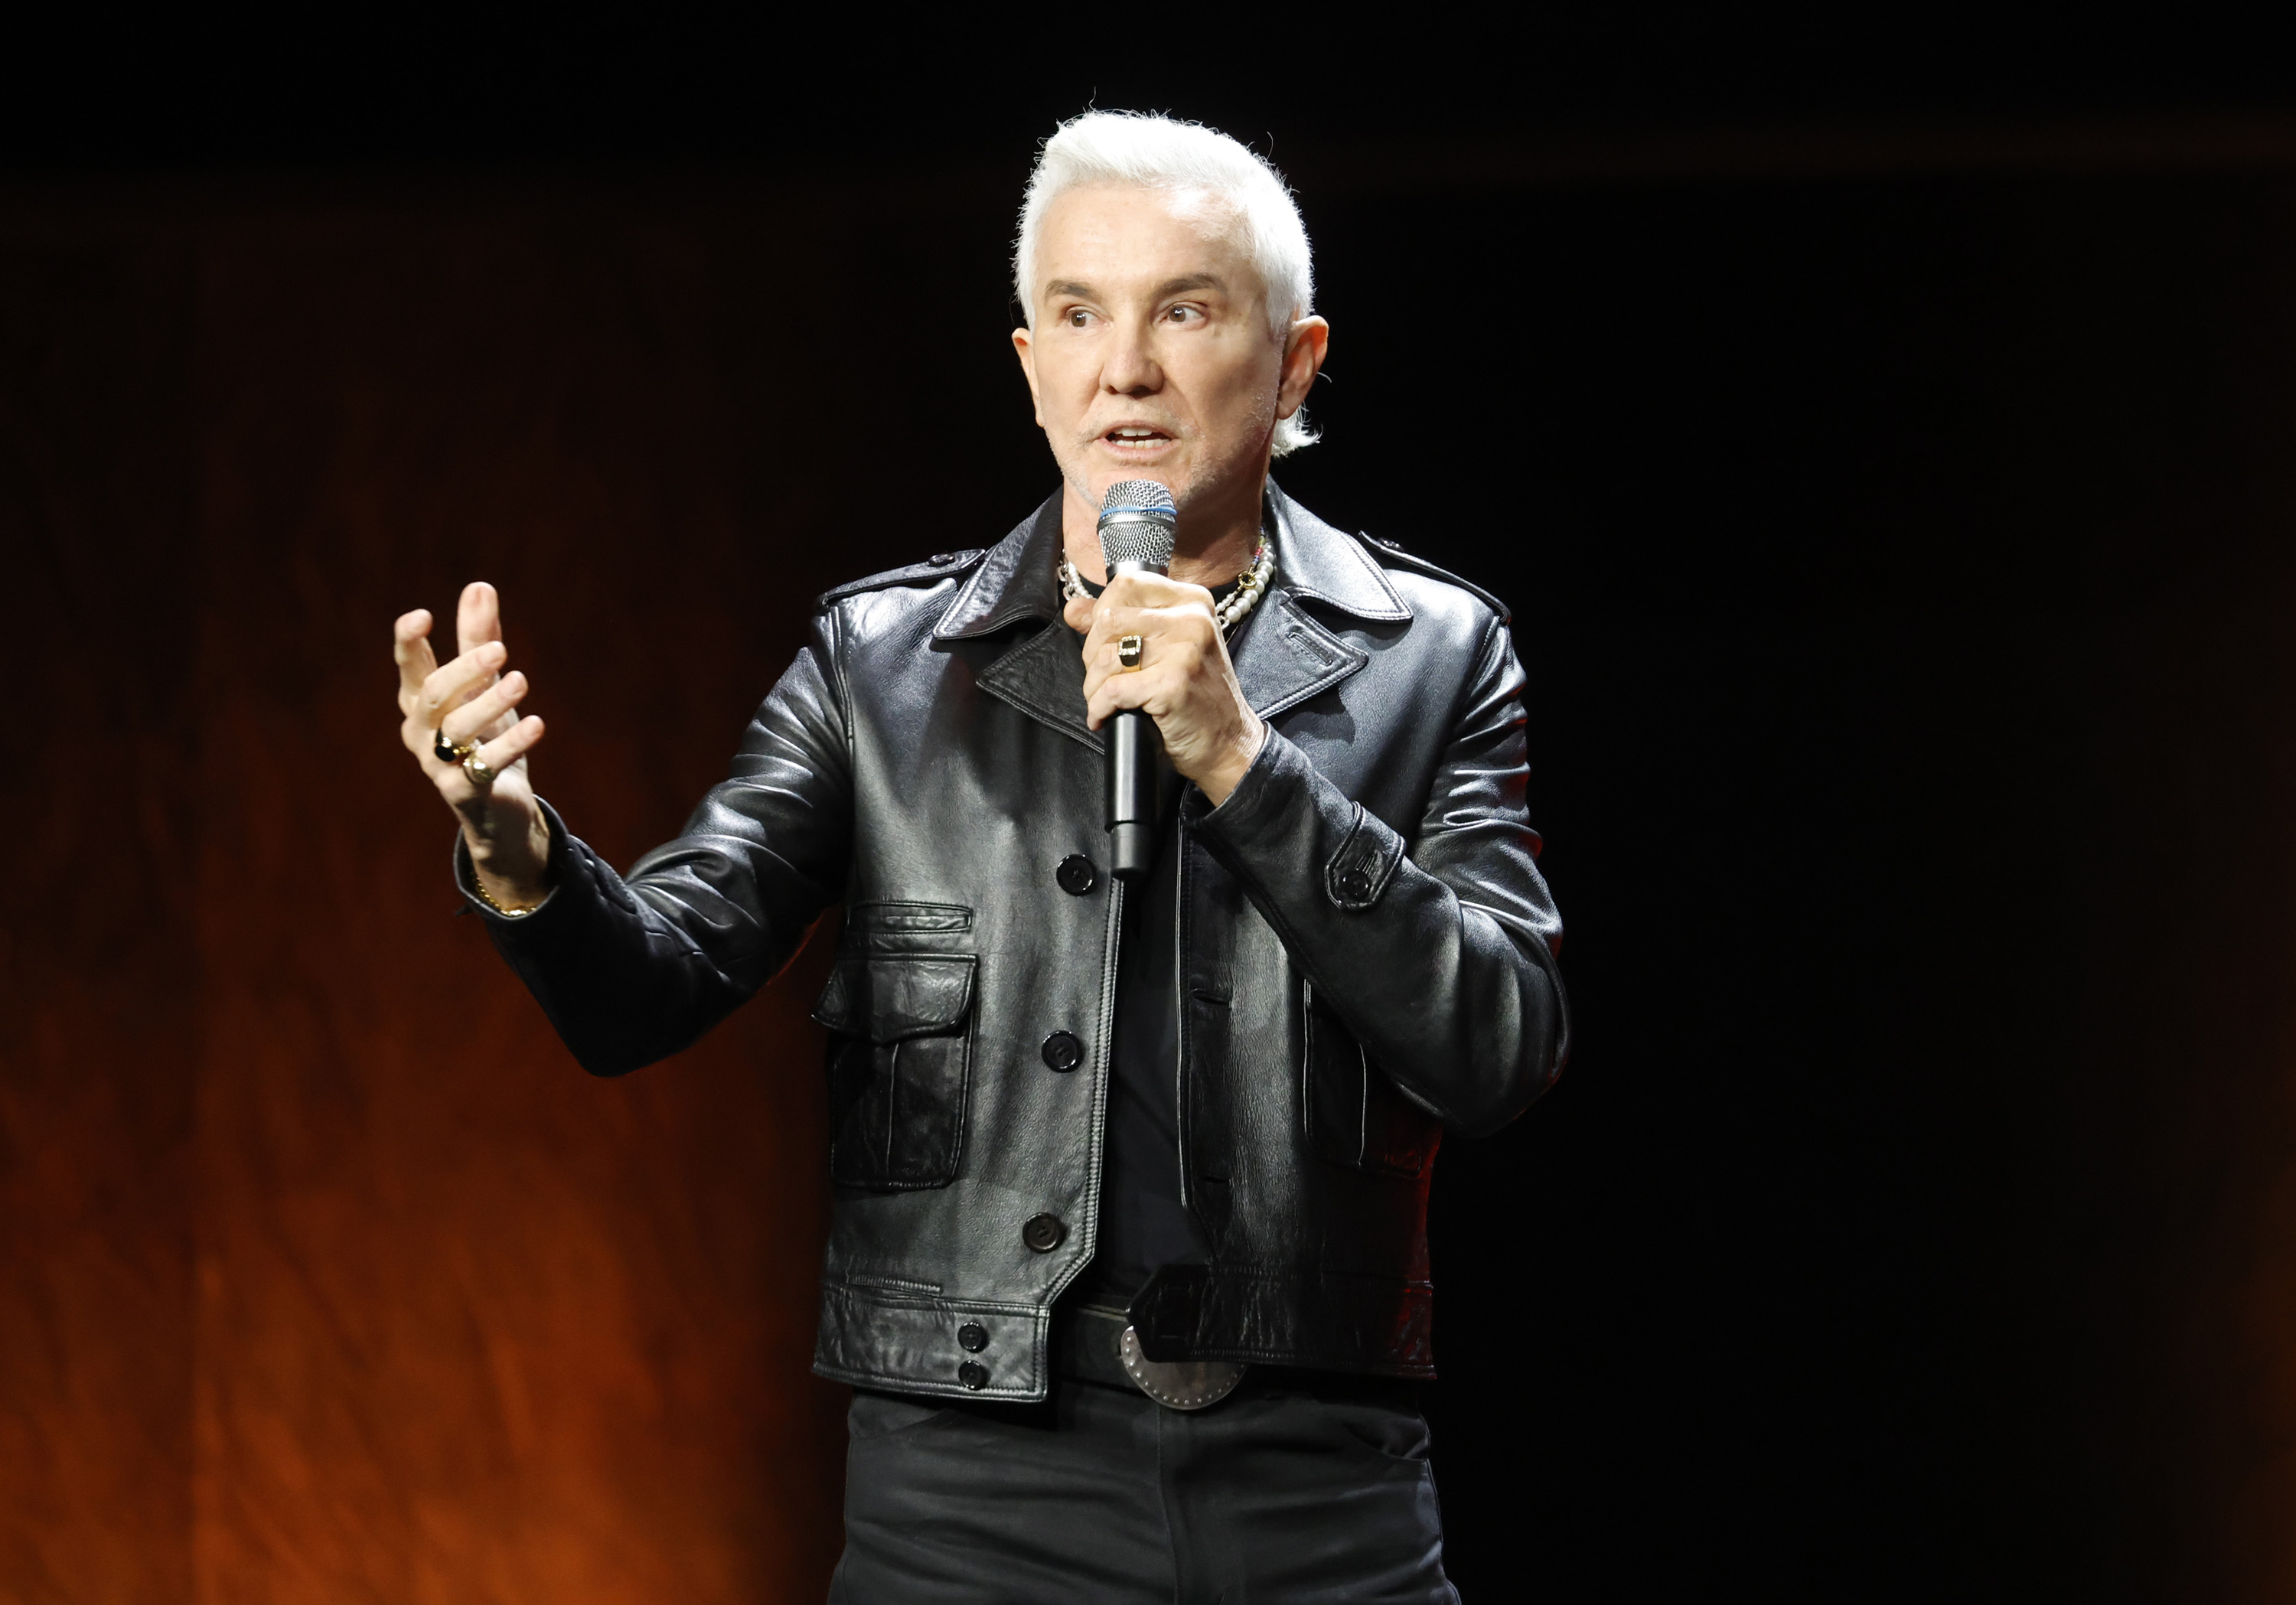 Director Baz Luhrmann speaks on stage about Elvis during the Warner Bros. Discovery panel at CinemaCon